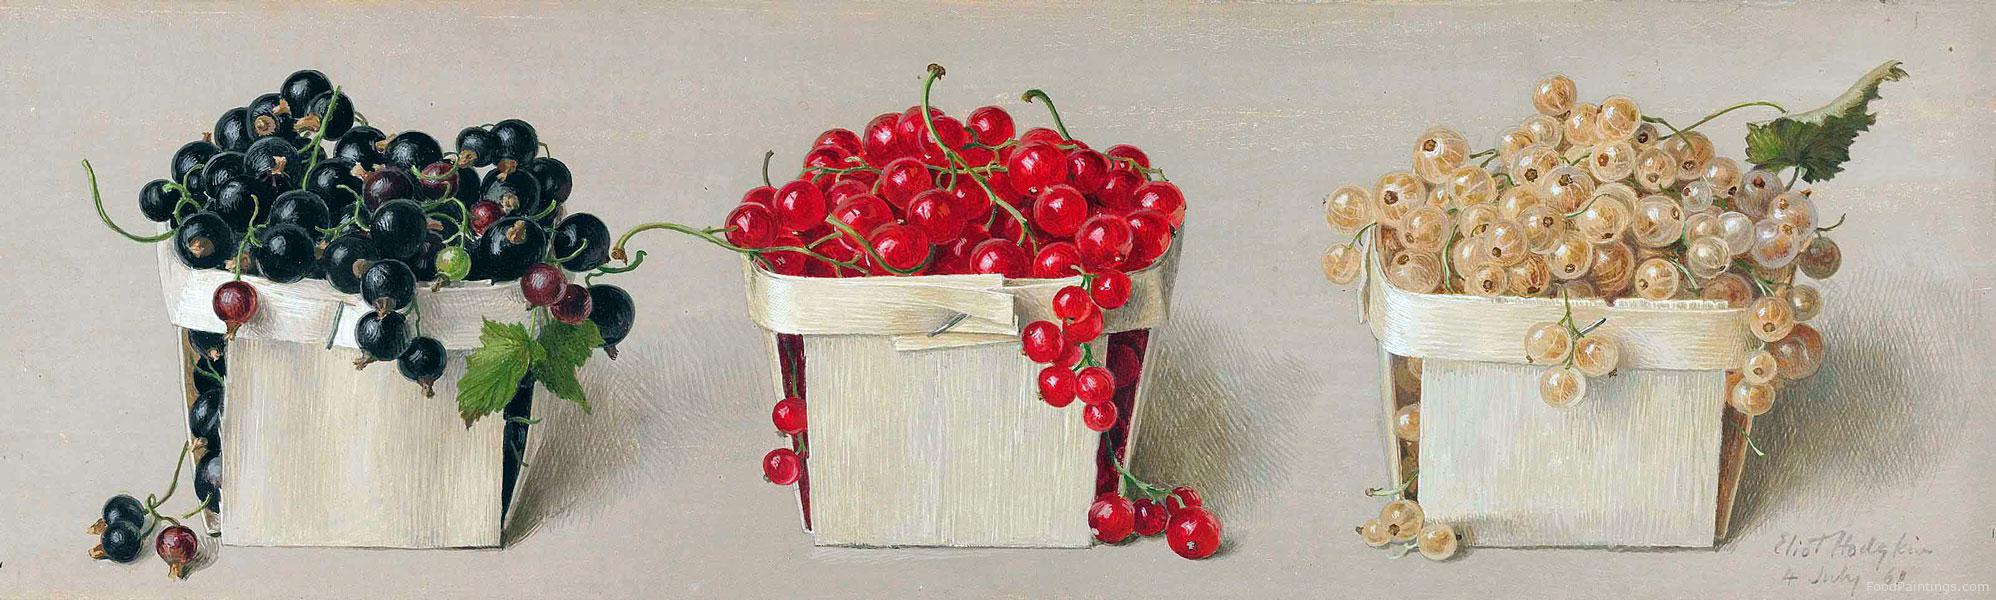 Still Life with Black, Red and White Currants - Eliot Hodgkin - 1961